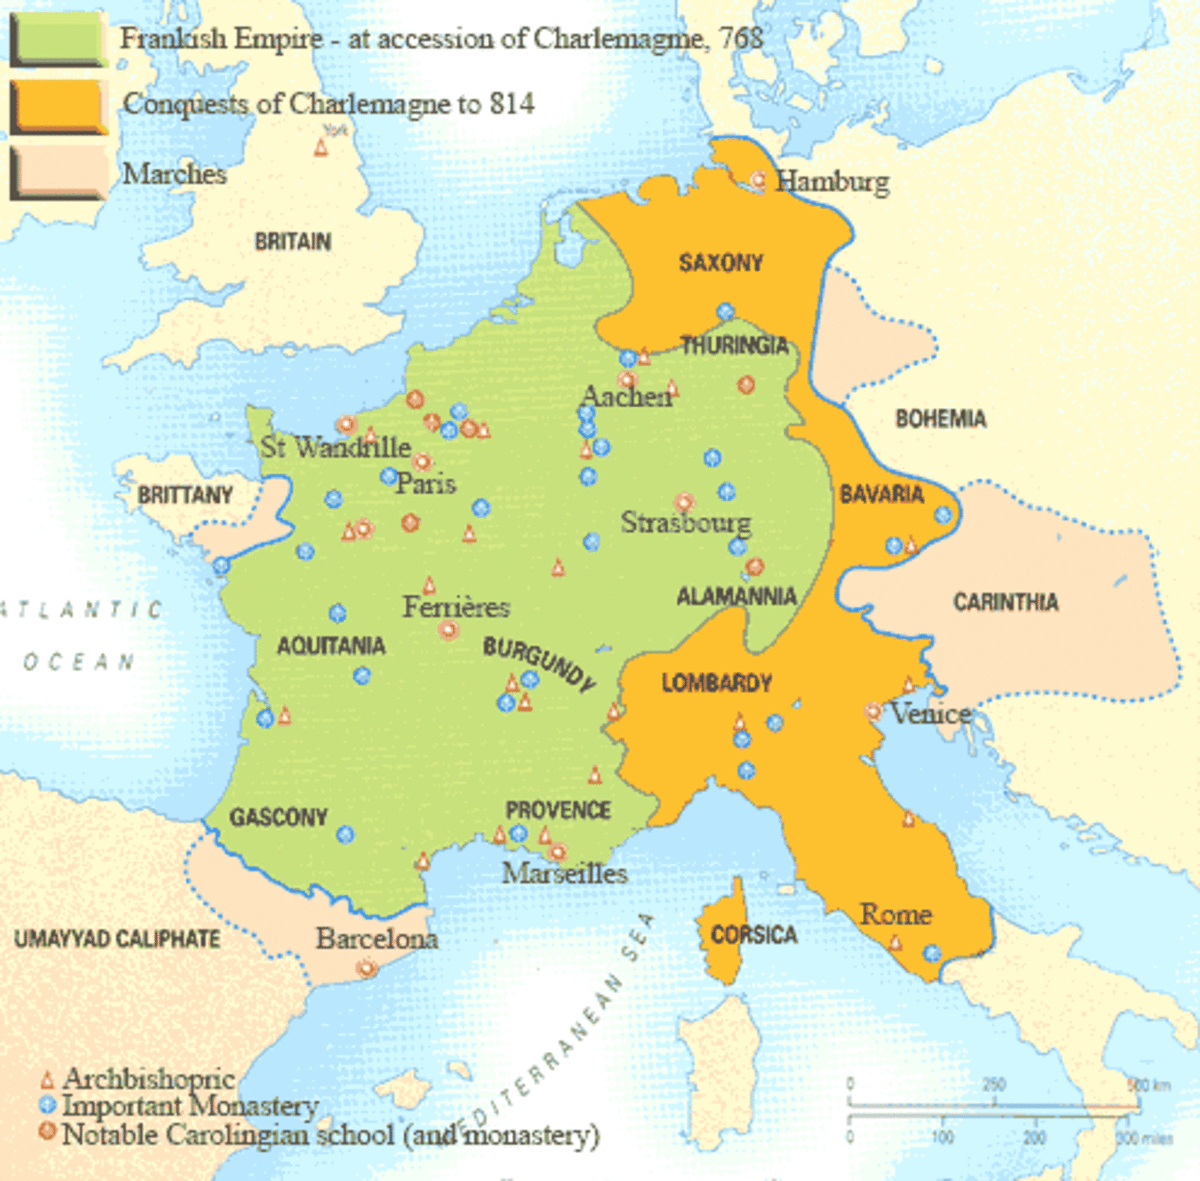 THE HOLY ROMAN EMPIRE OF CHARLEMAGNE